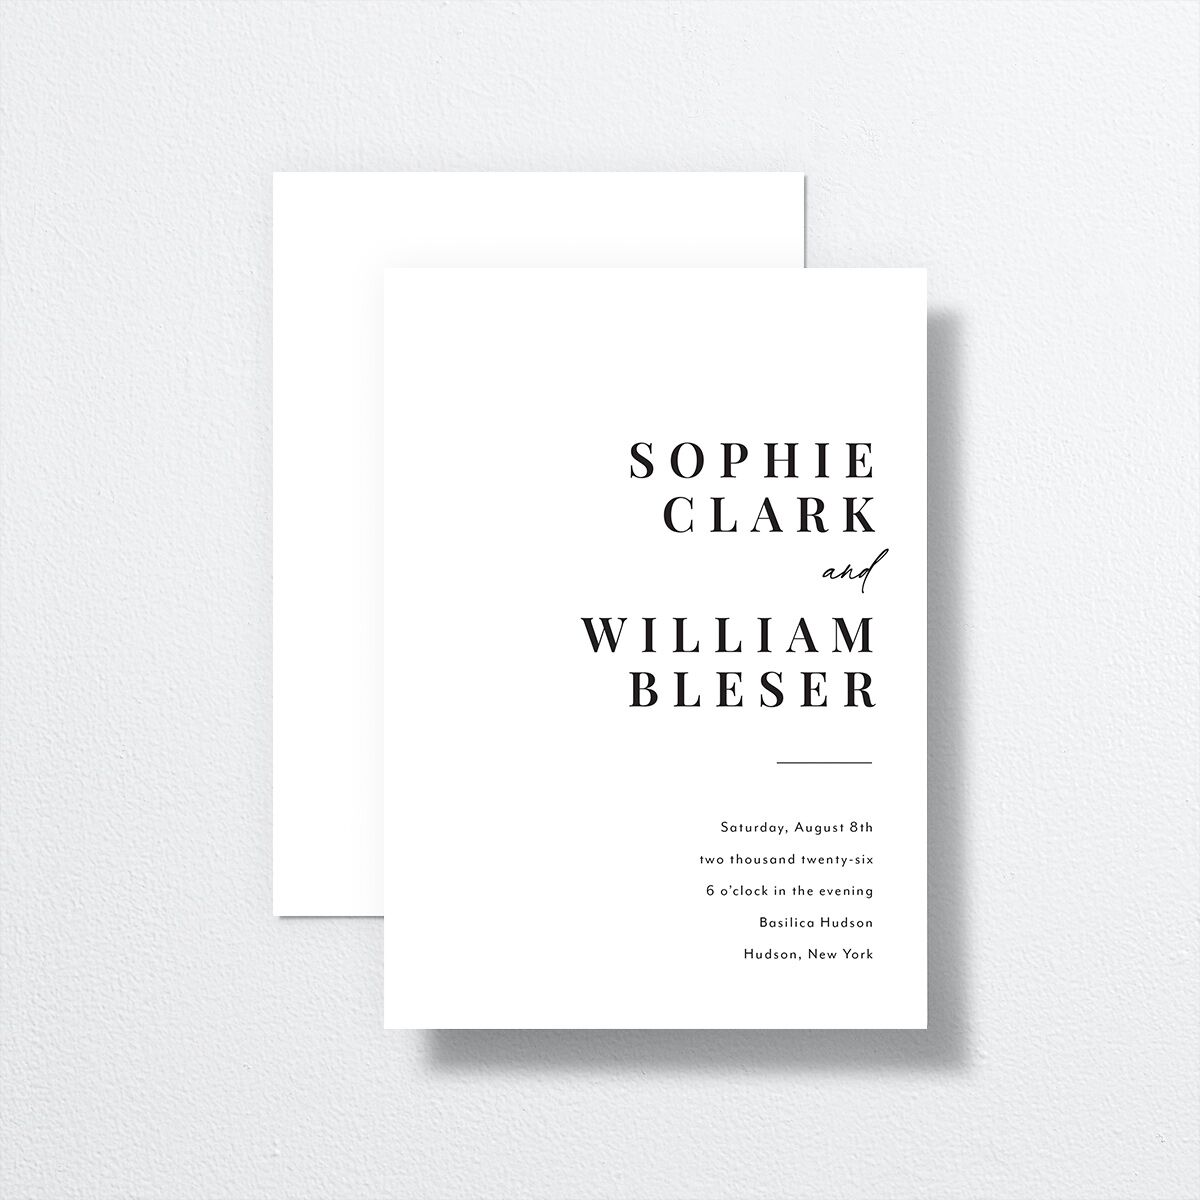 Modern Bodoni Wedding Invitations front-and-back in white